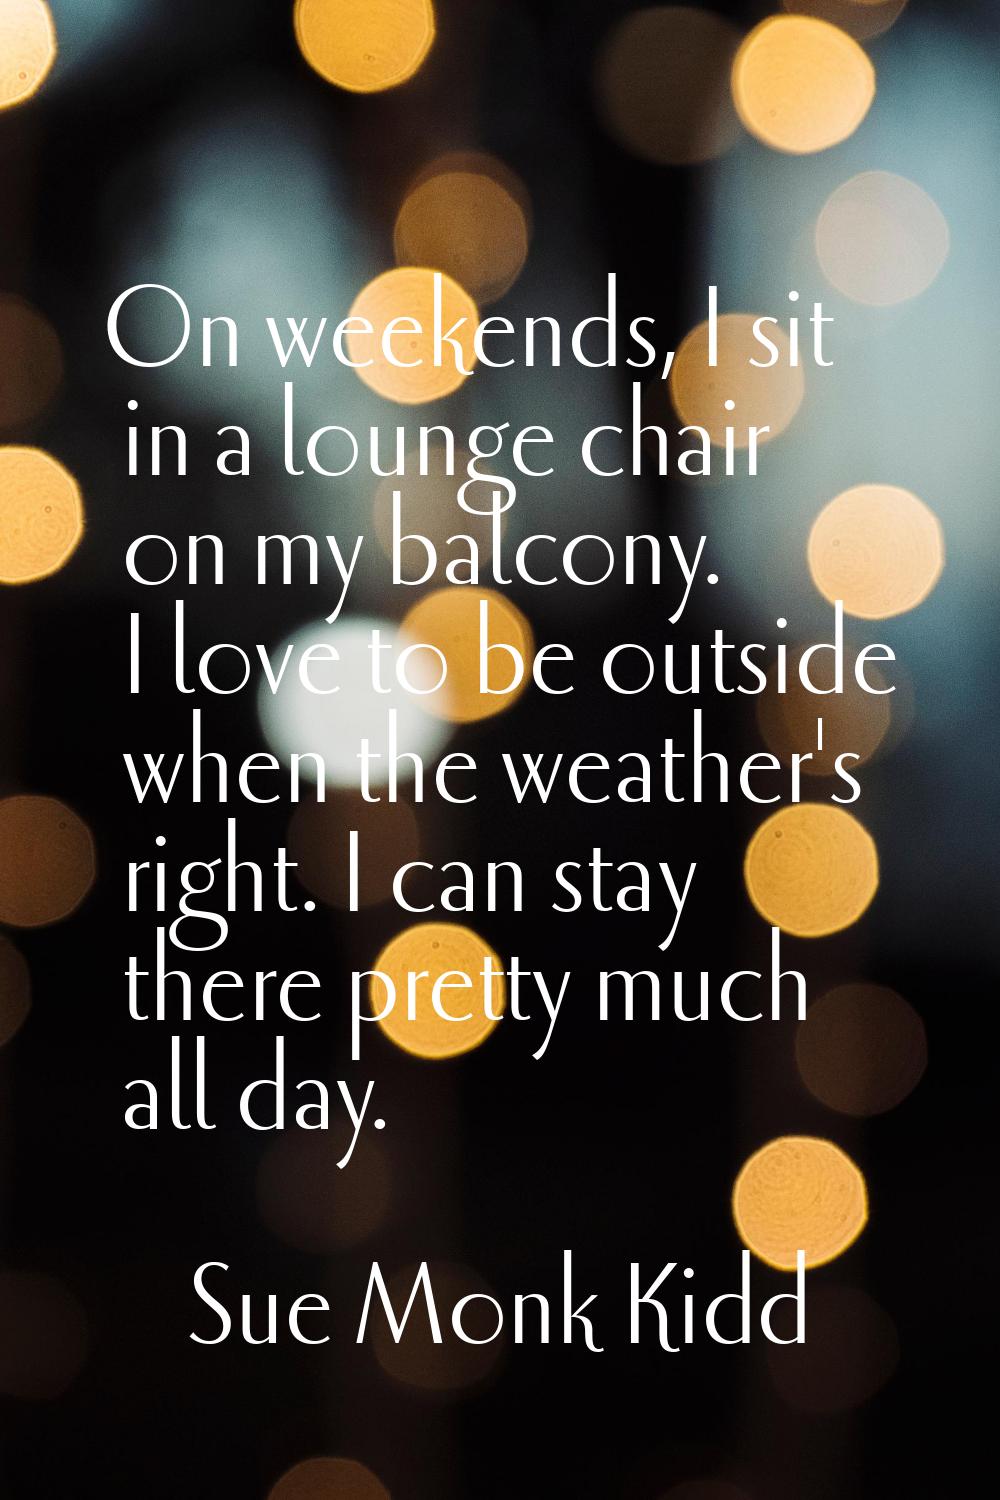 On weekends, I sit in a lounge chair on my balcony. I love to be outside when the weather's right. 